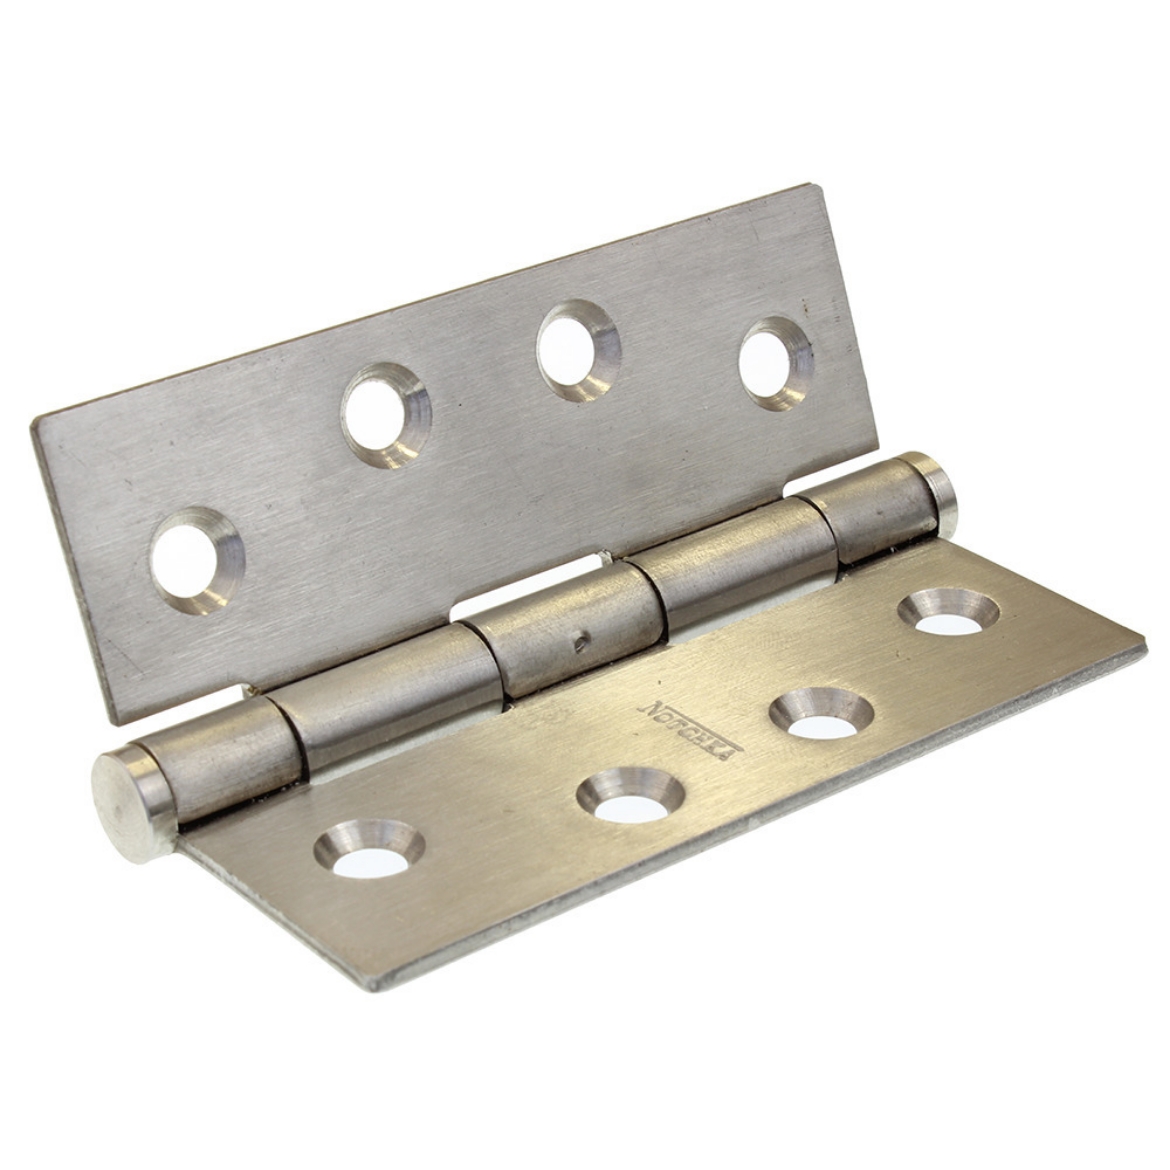 Picture of Butt hinge 100mm x 75m open x 2.5mm thick stainless steel